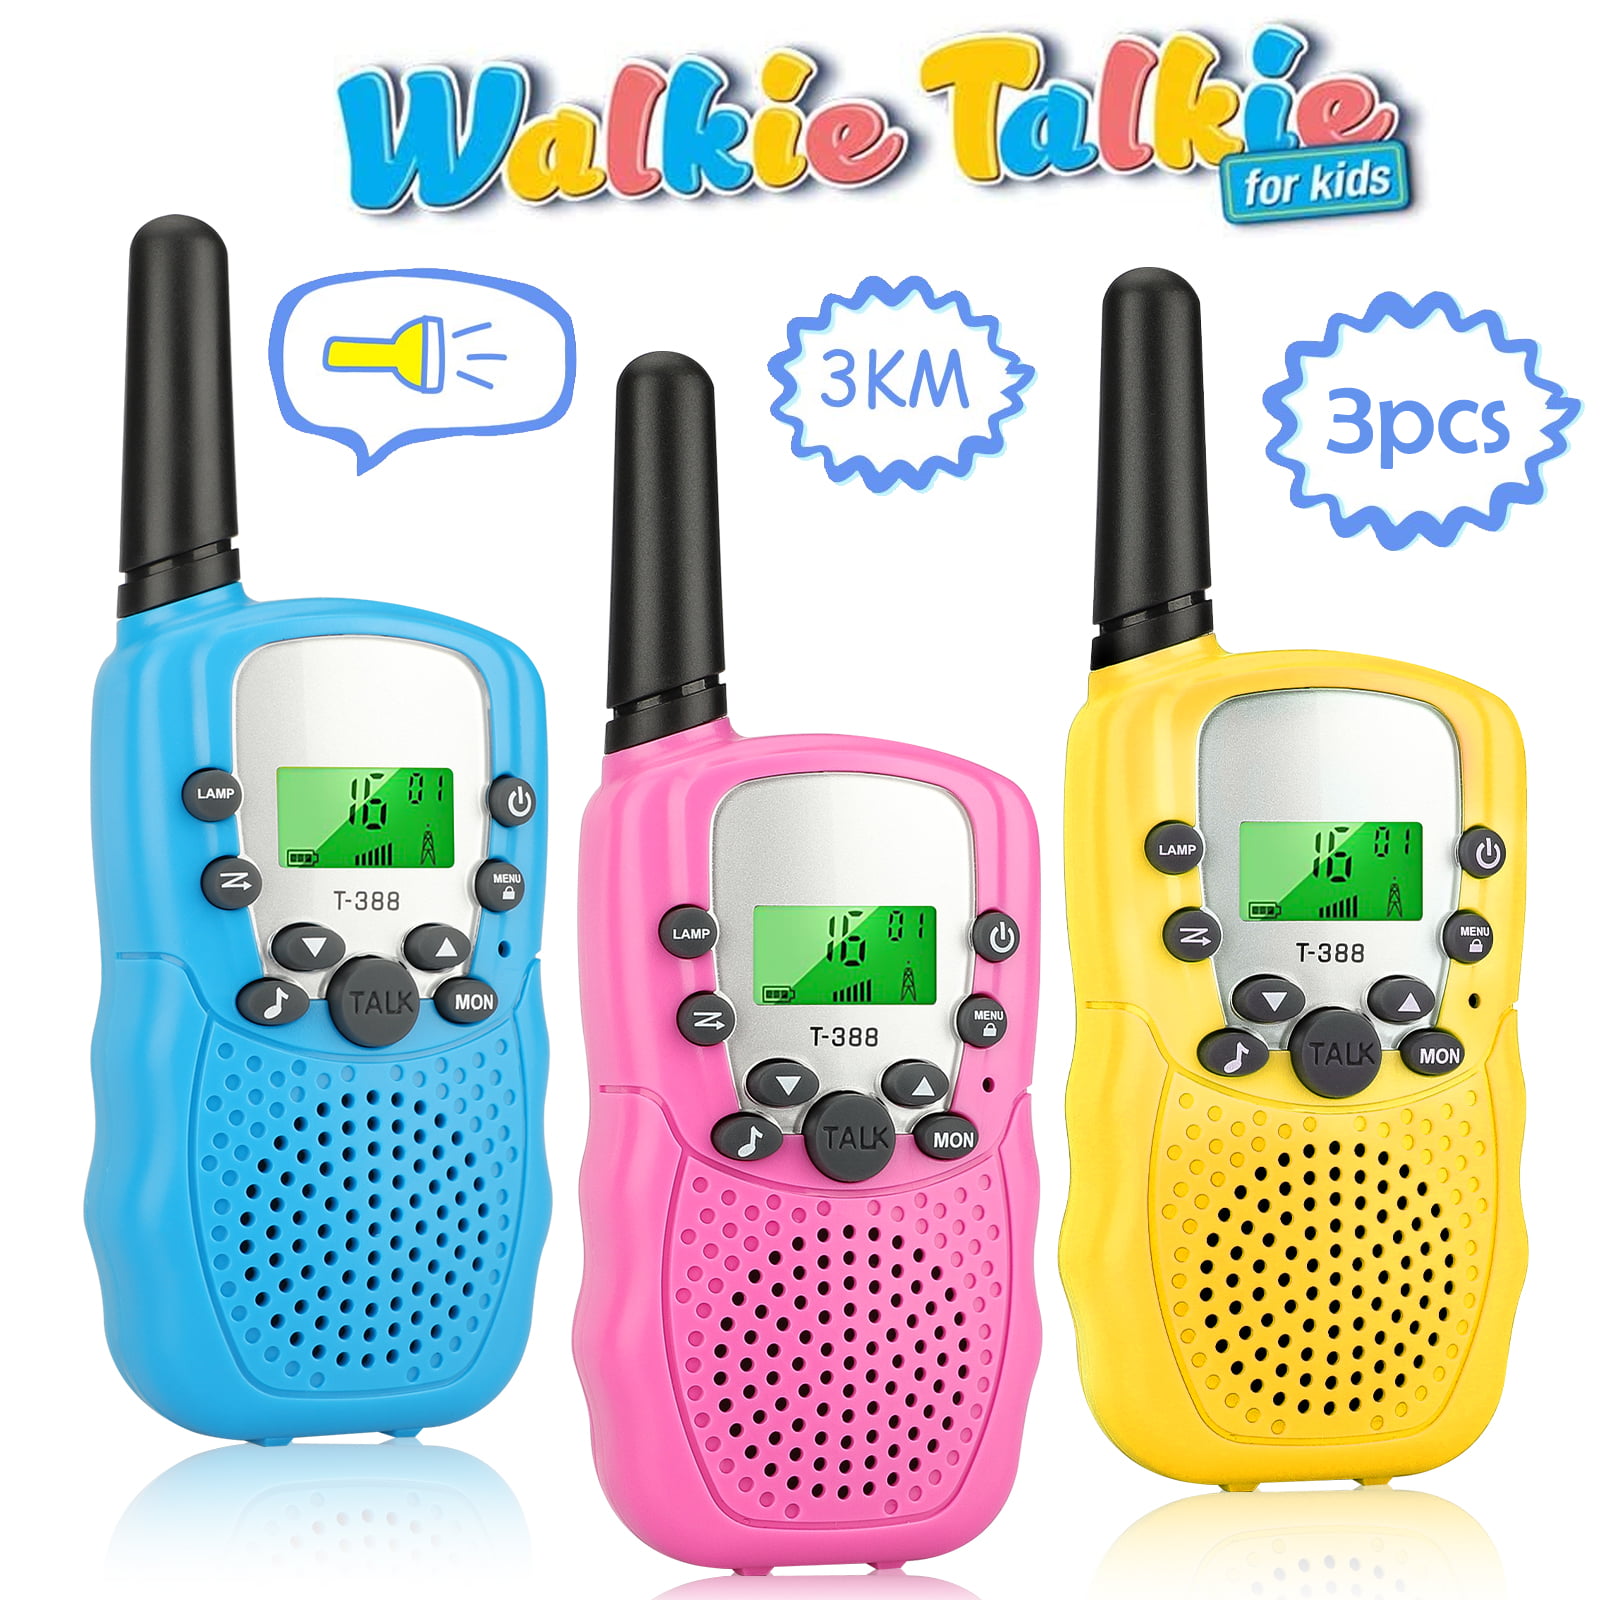 22 Channel 2-way Radios Walkie Talkie 3KM Long Distance Walky Talky with LCD Screen Flashlight Kids Toys for Boys Girls Camping Hiking Outdoor yellow,pink,blue Walkie Talkie kids 3 Pack